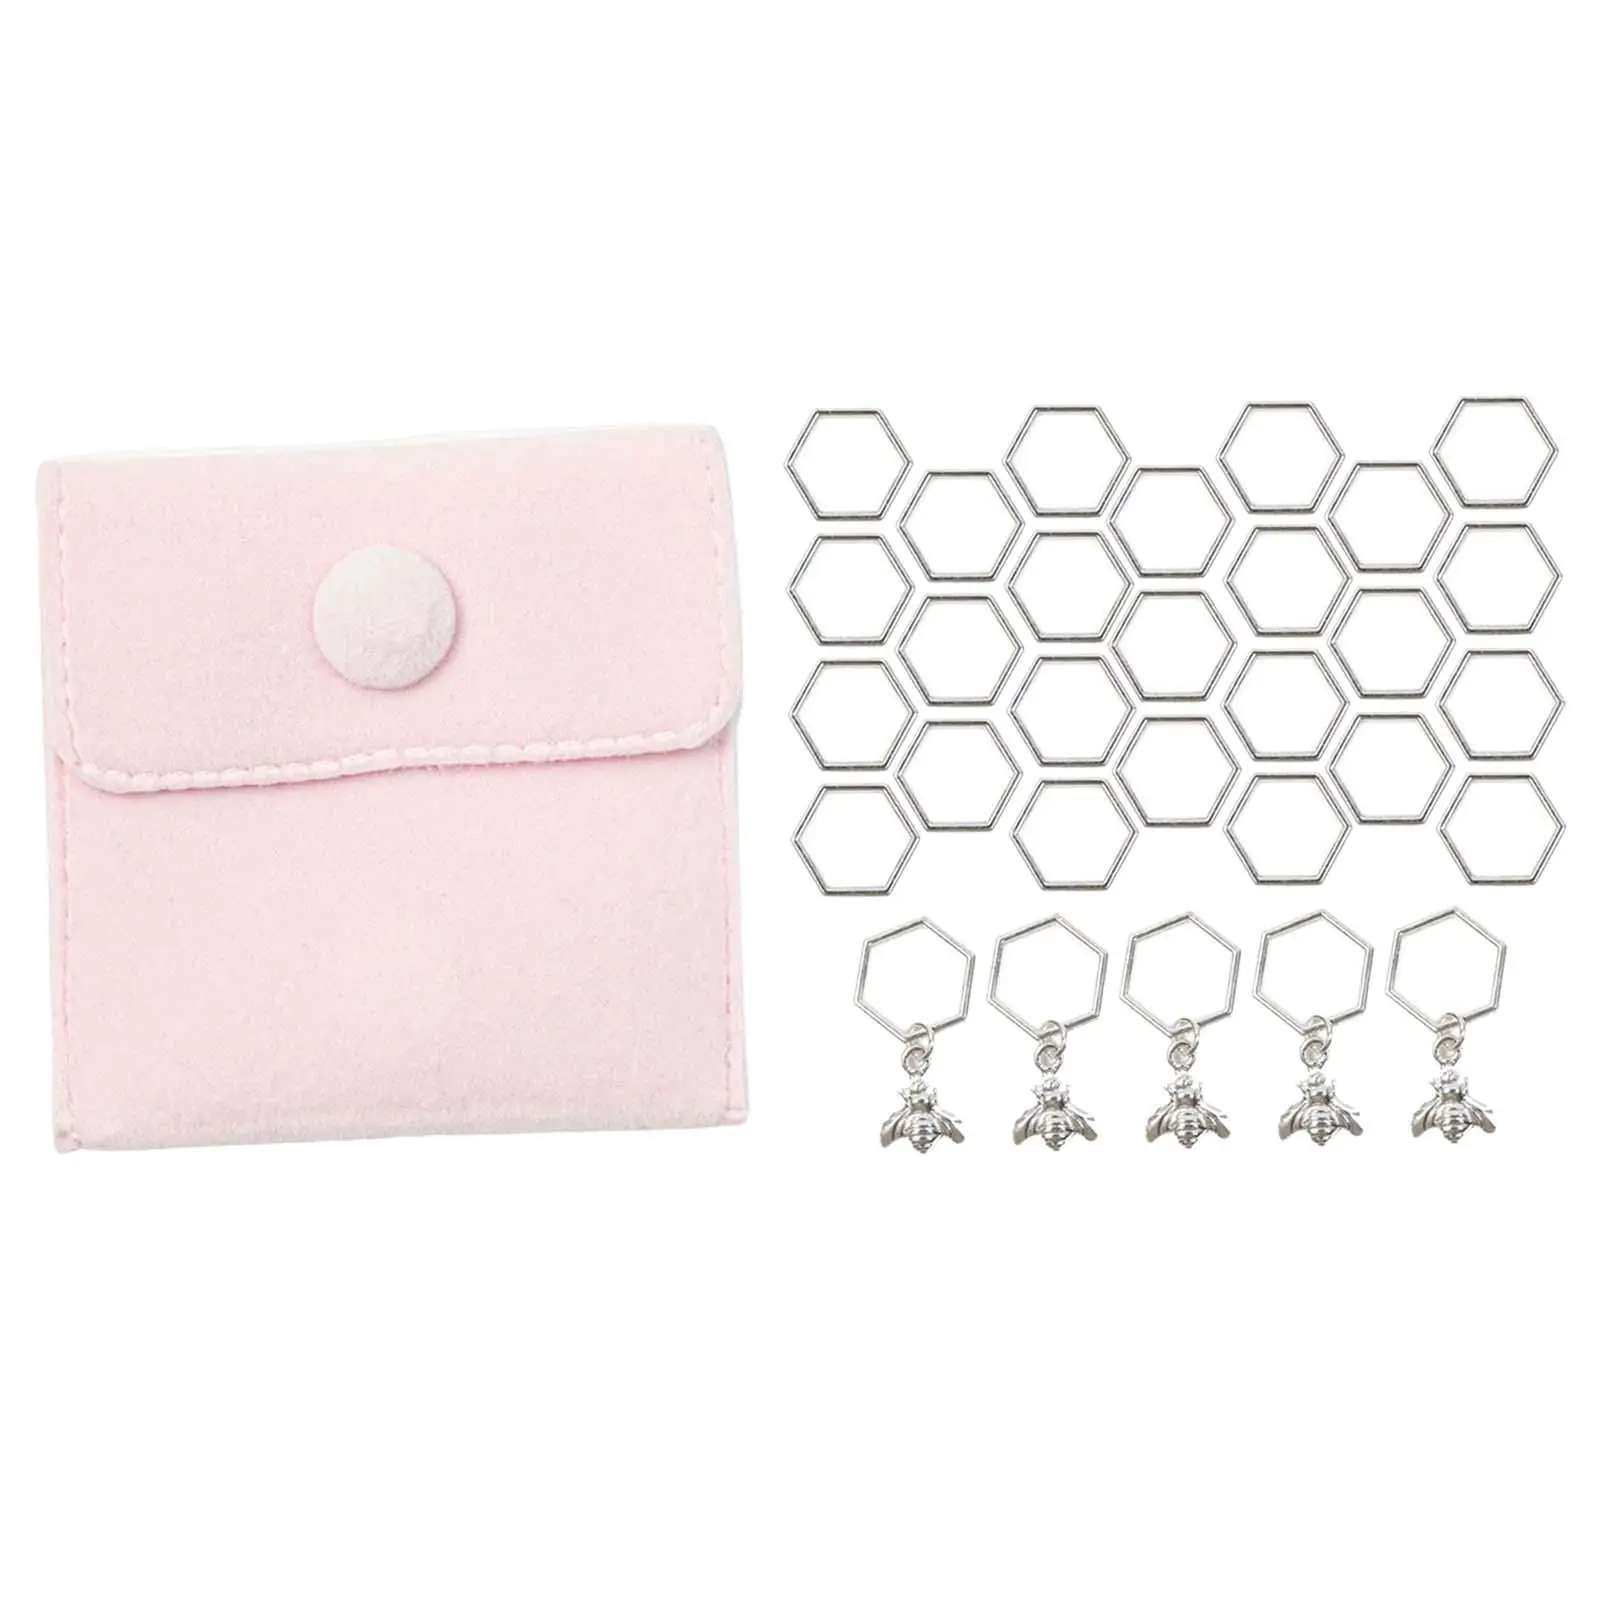 Stitch Markers Reusable 30x Stoppers Knitting Tools Smooth Protectors Knitting Stitch Markers for Crocheting DIY Handmade Craft